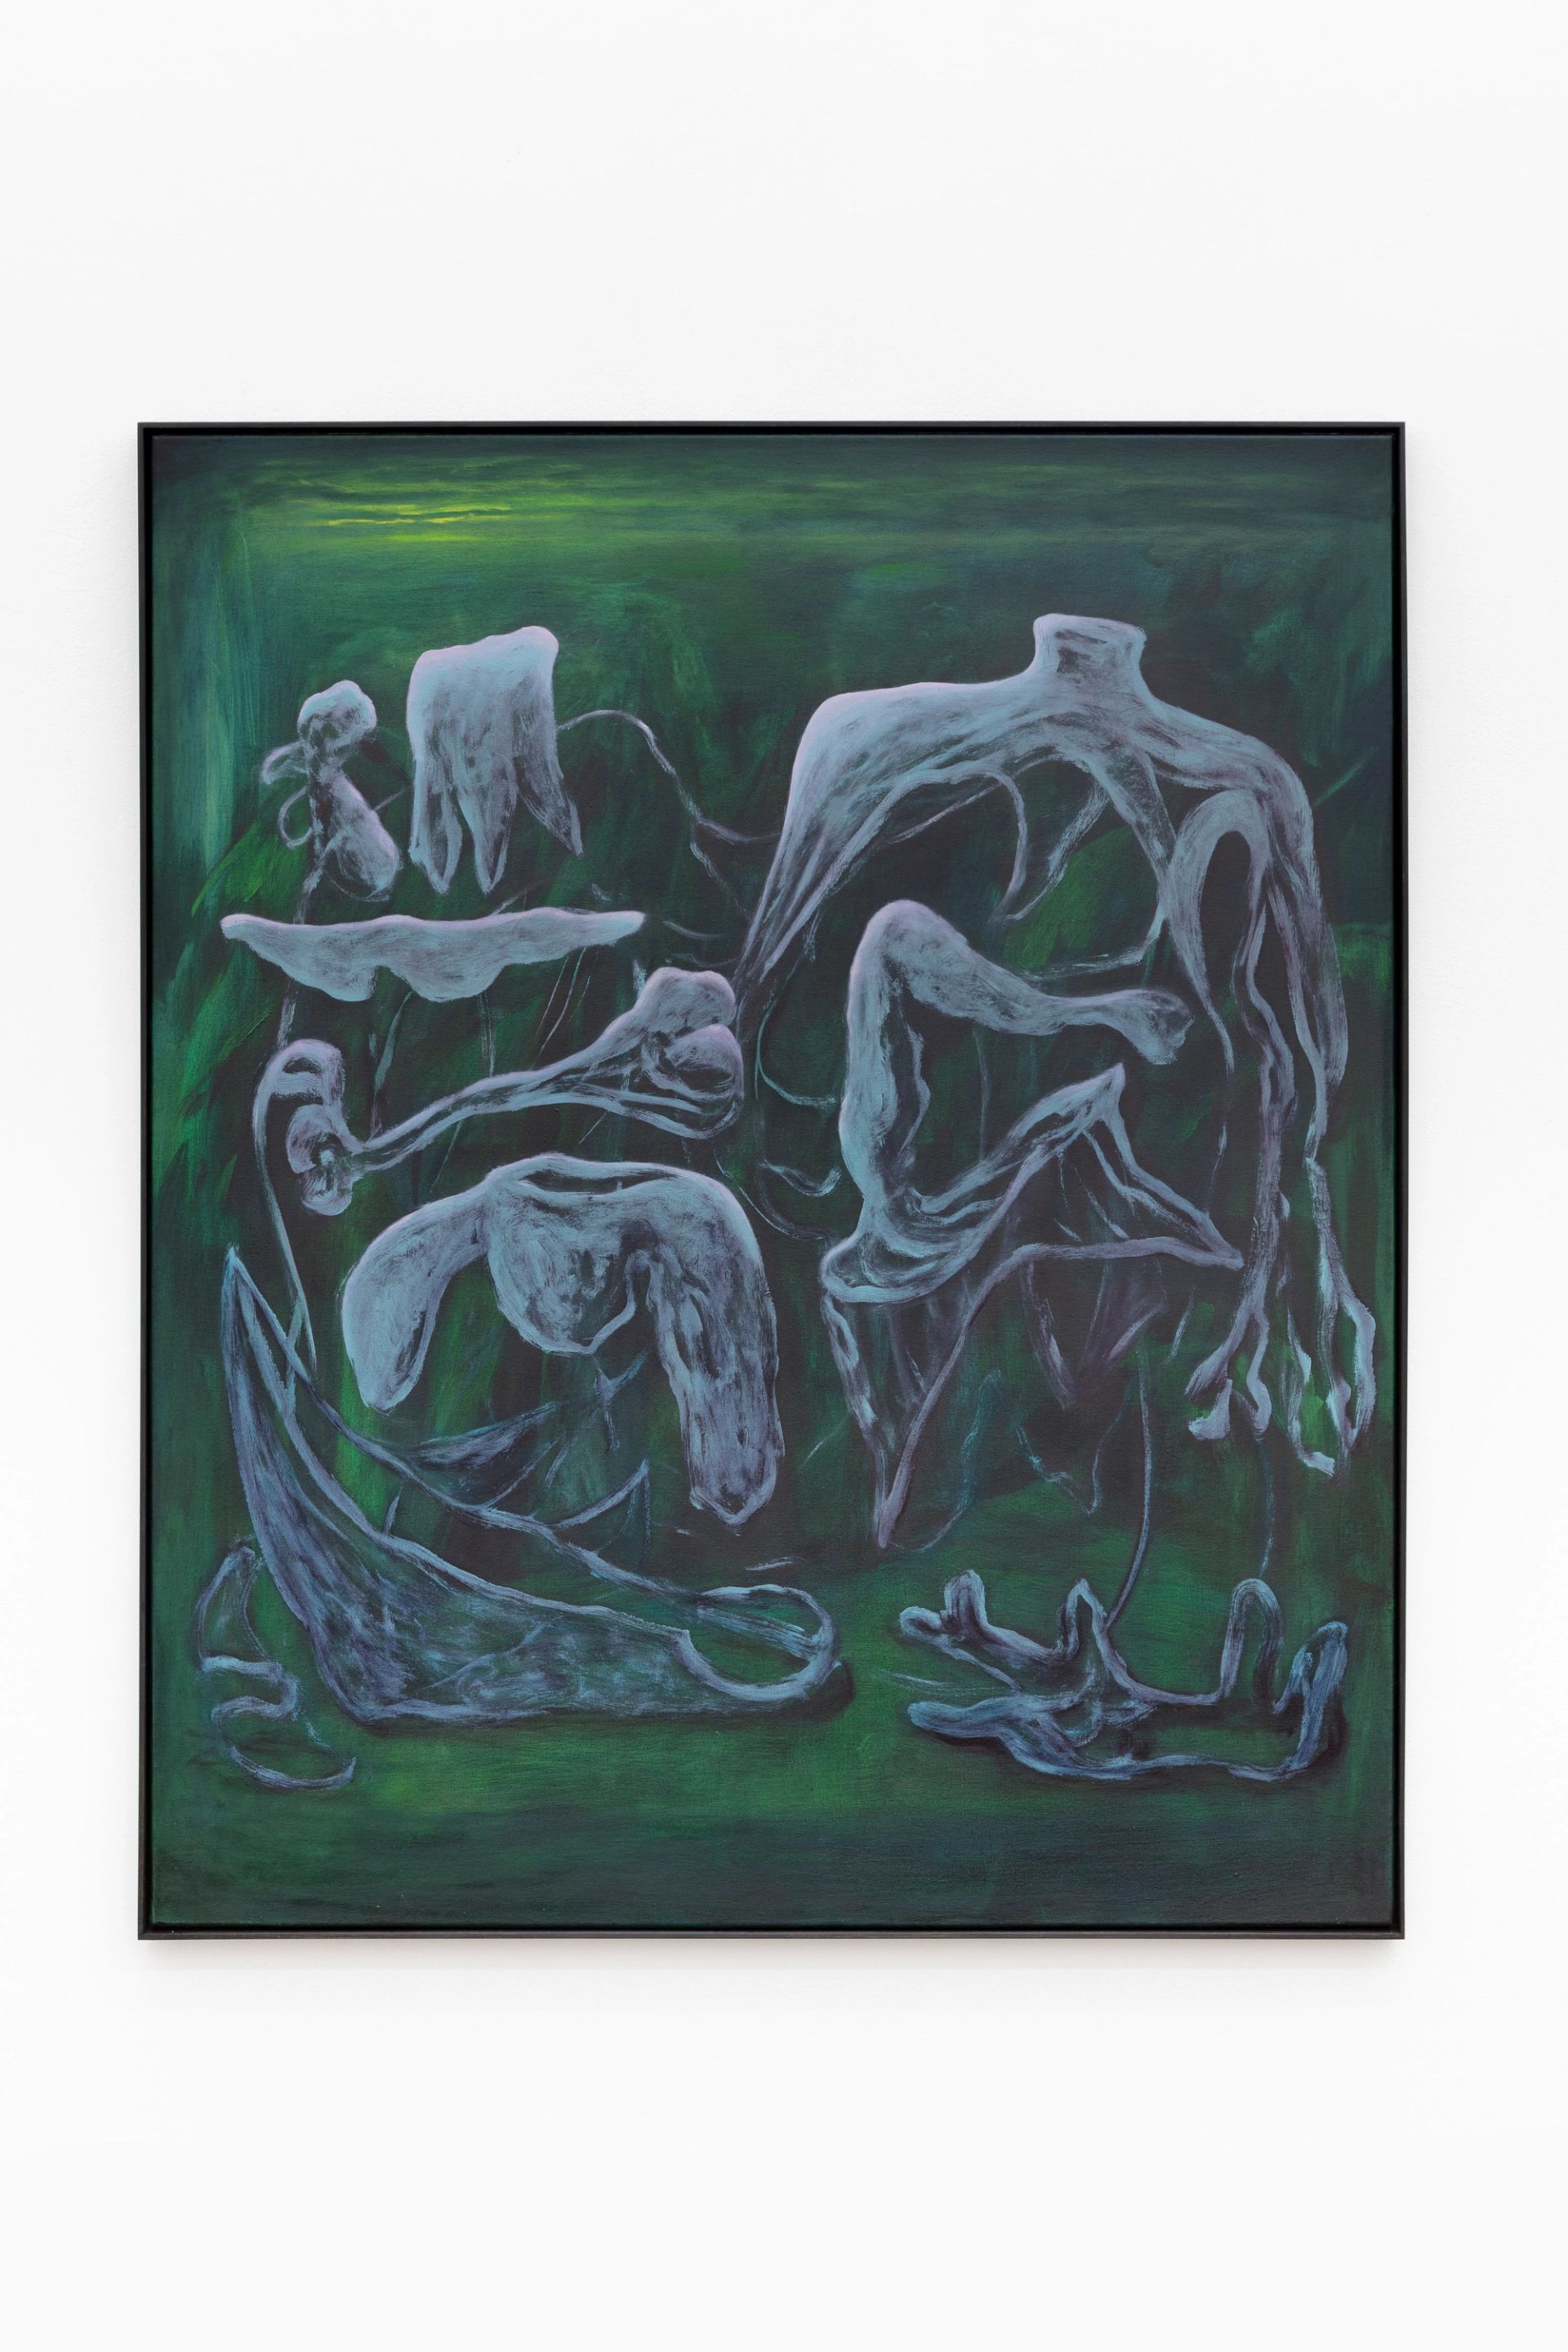 Veronika Hilger, Untitled, 2023, oil and acrylic on canvas, in wooden frame, 120 × 100 cm, VH/M 175